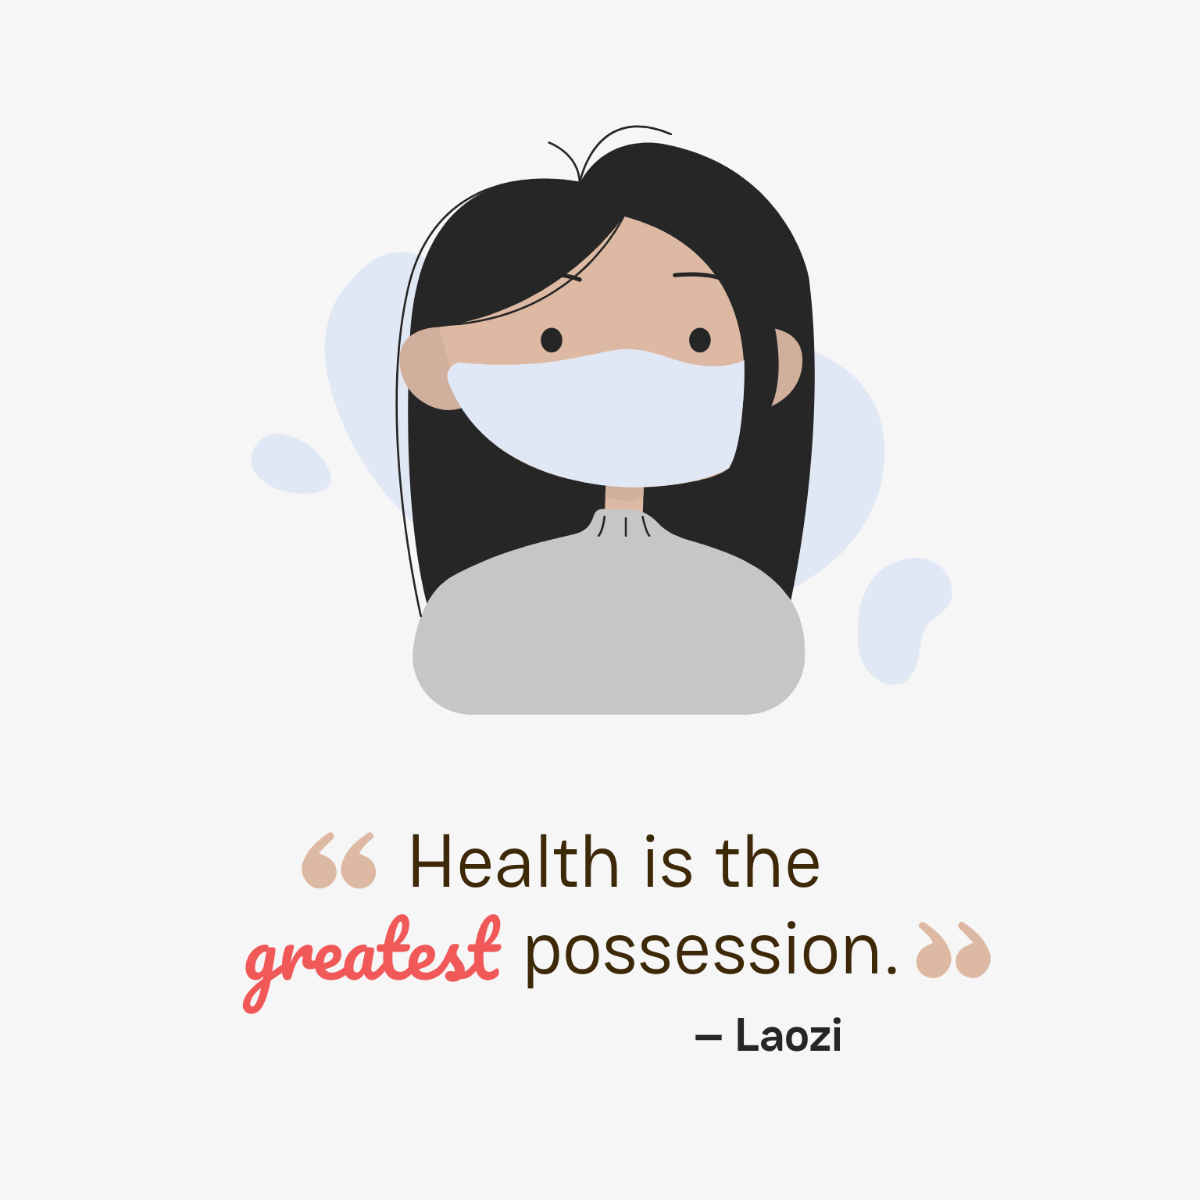 Child Health Day Quote Vector